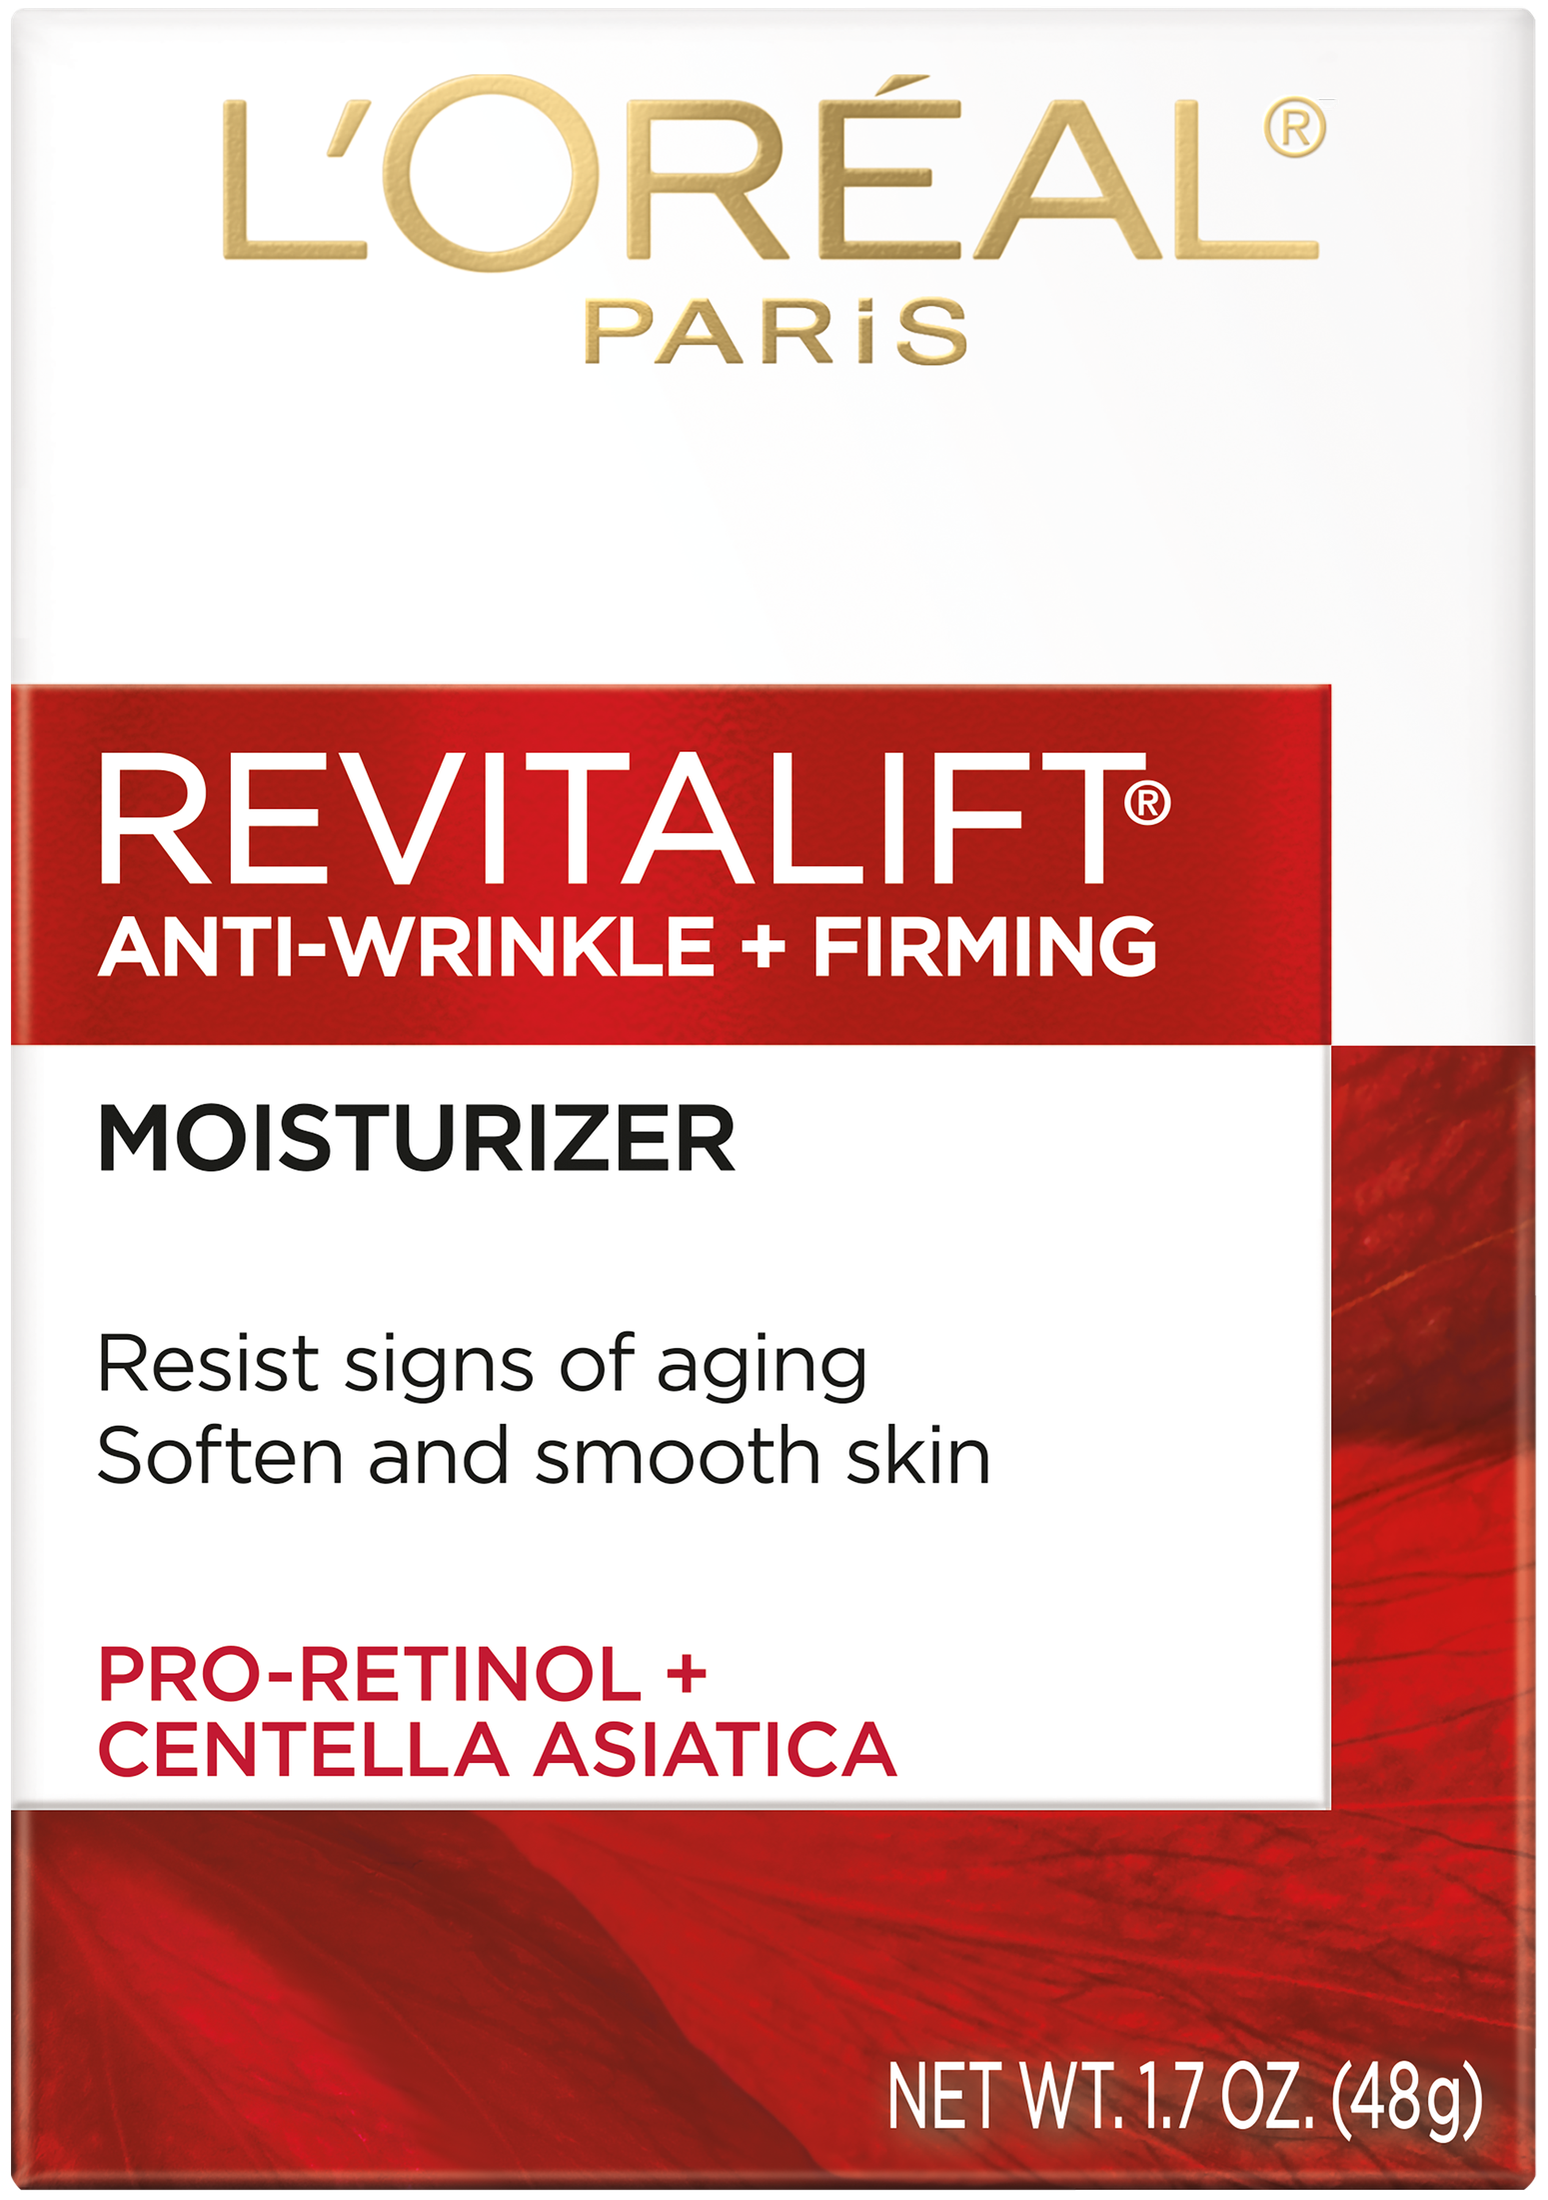 L'Oreal Paris Revitalift Anti-Wrinkle and Firming Face Moisturizer, 1.7 oz - image 3 of 10